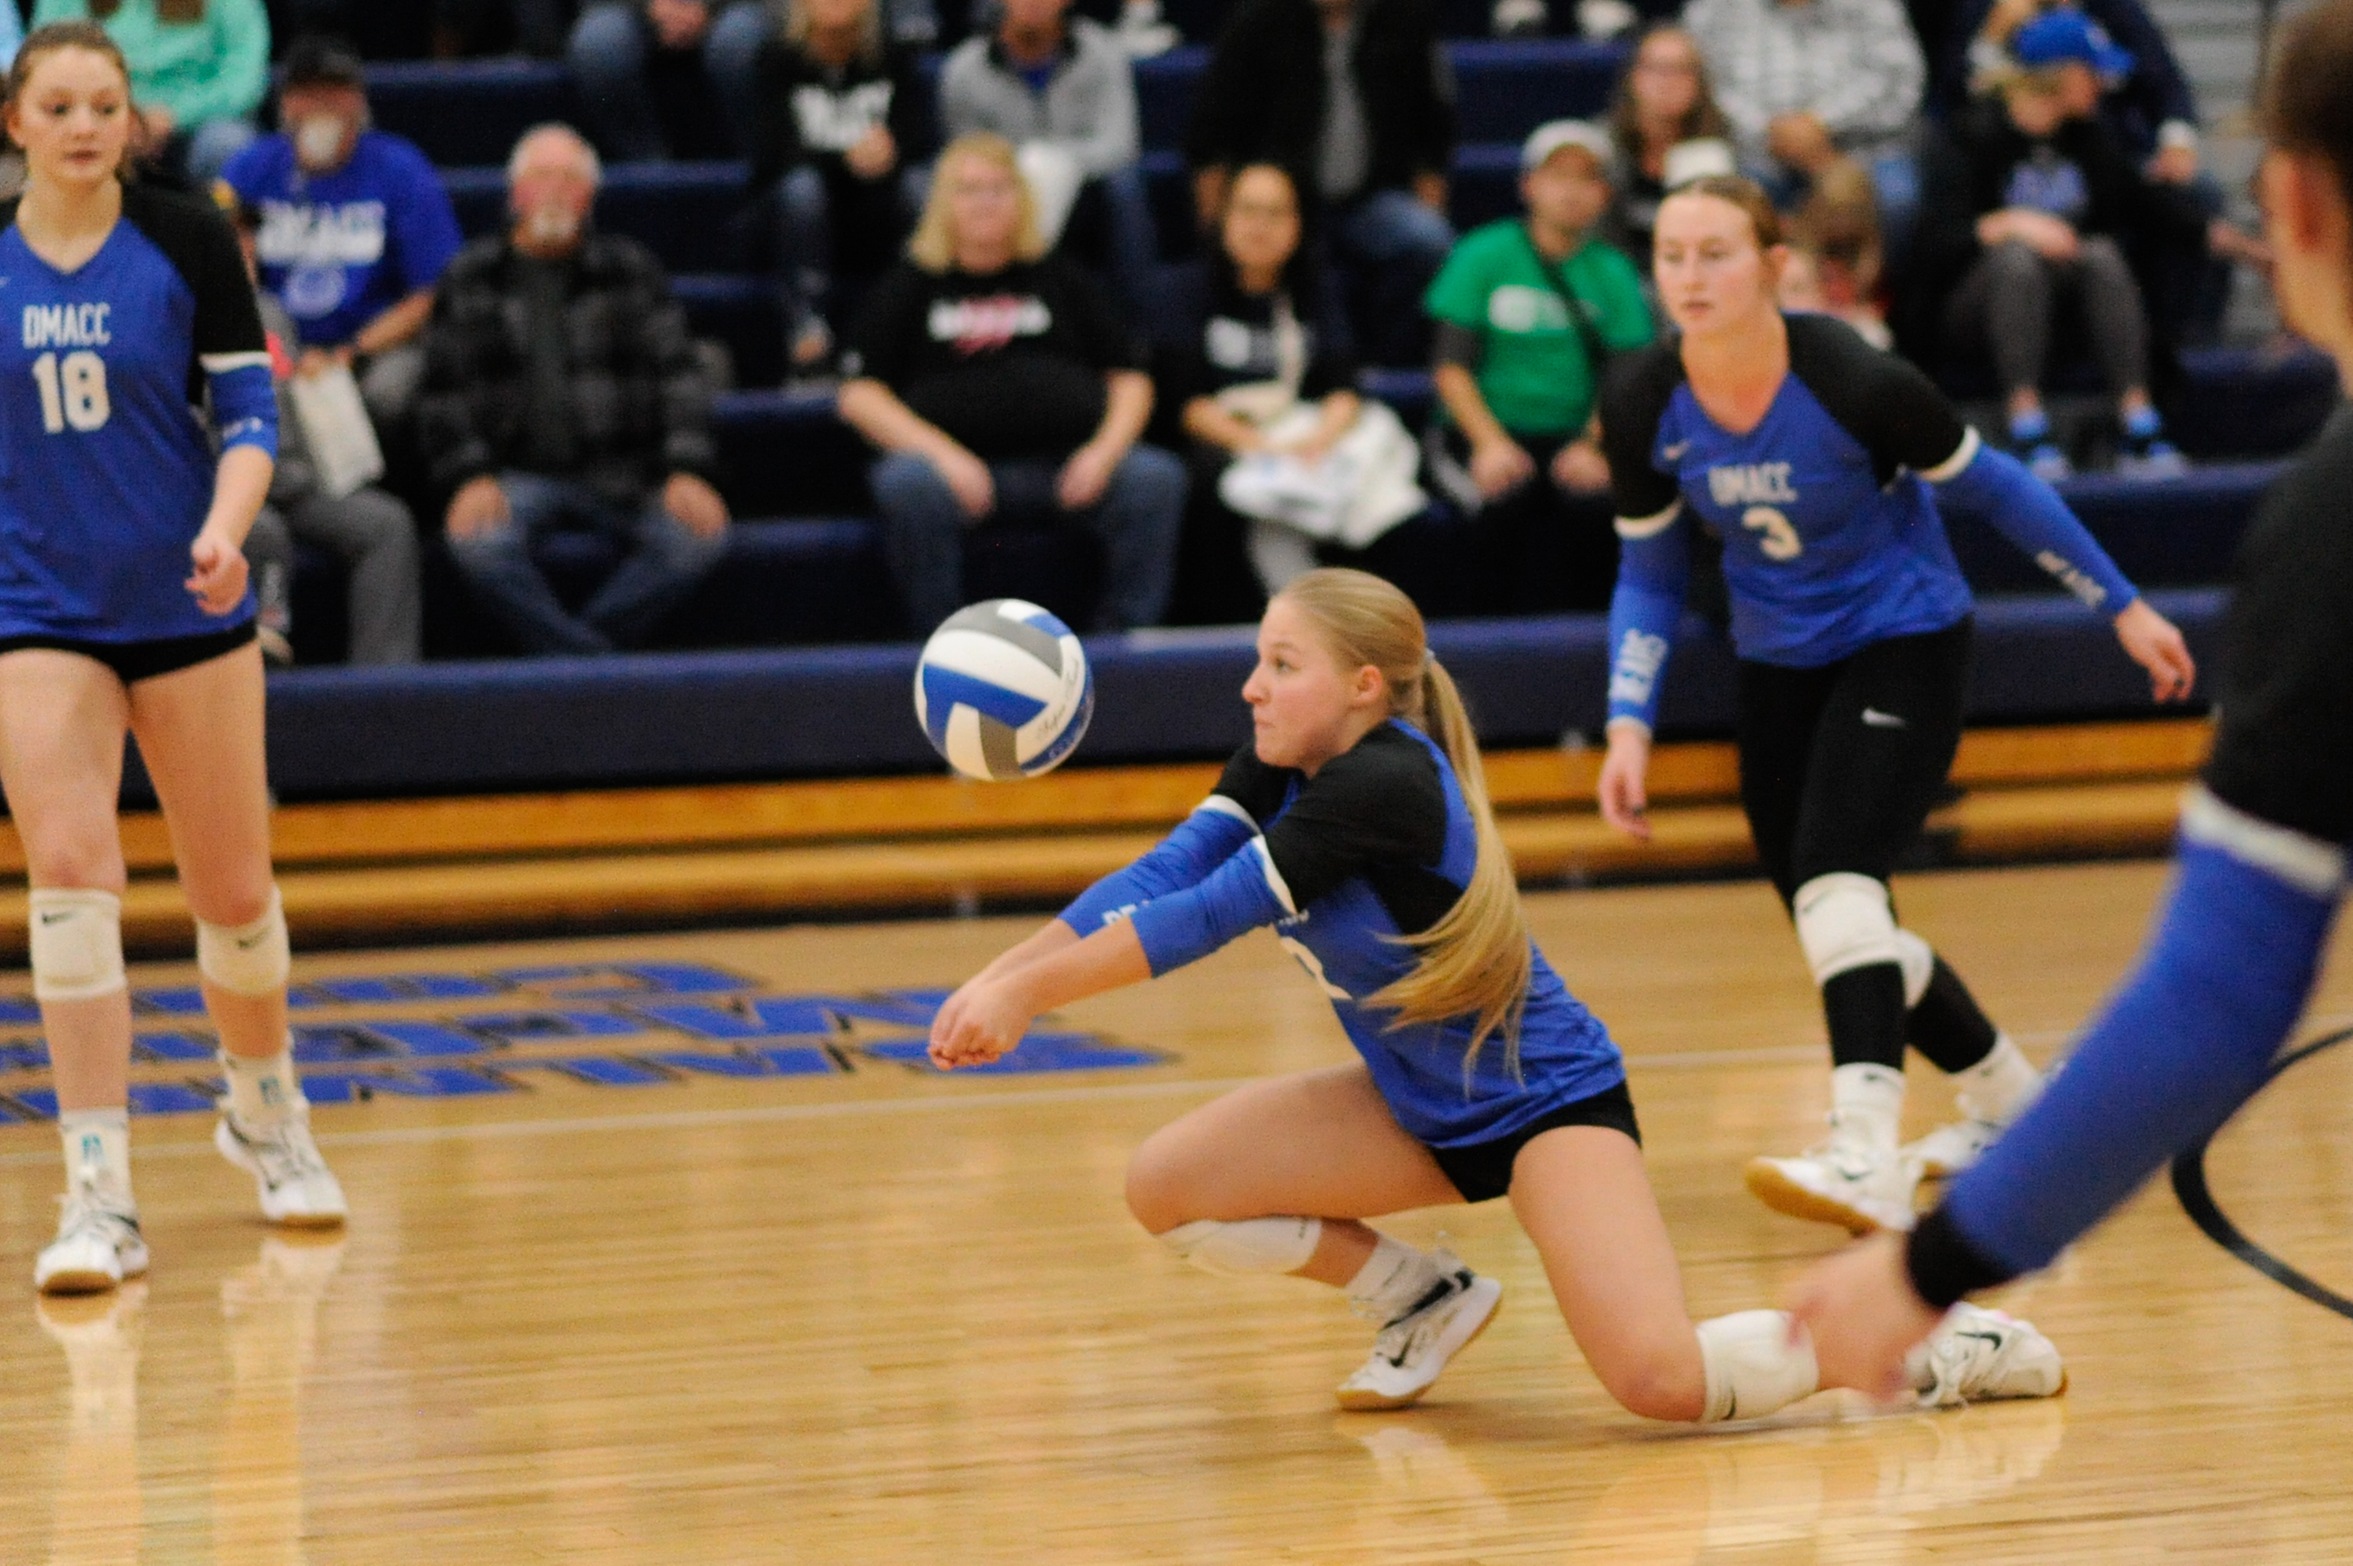 DMACC volleyball team falls to Iowa Central in Region XI Title Match